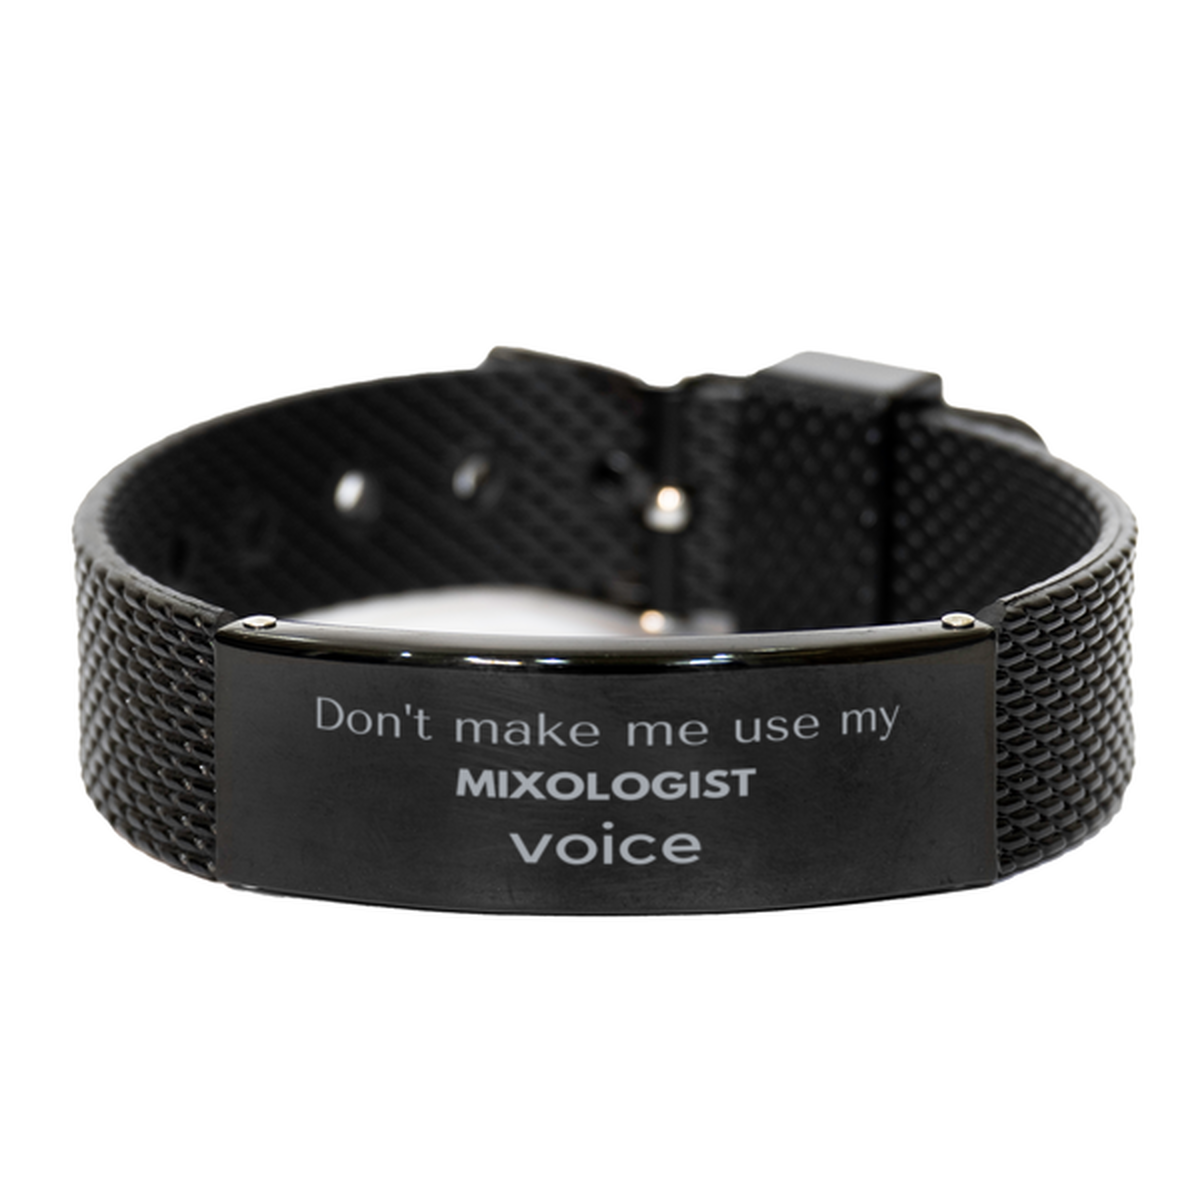 Don't make me use my Mixologist voice, Sarcasm Mixologist Gifts, Christmas Mixologist Black Shark Mesh Bracelet Birthday Unique Gifts For Mixologist Coworkers, Men, Women, Colleague, Friends